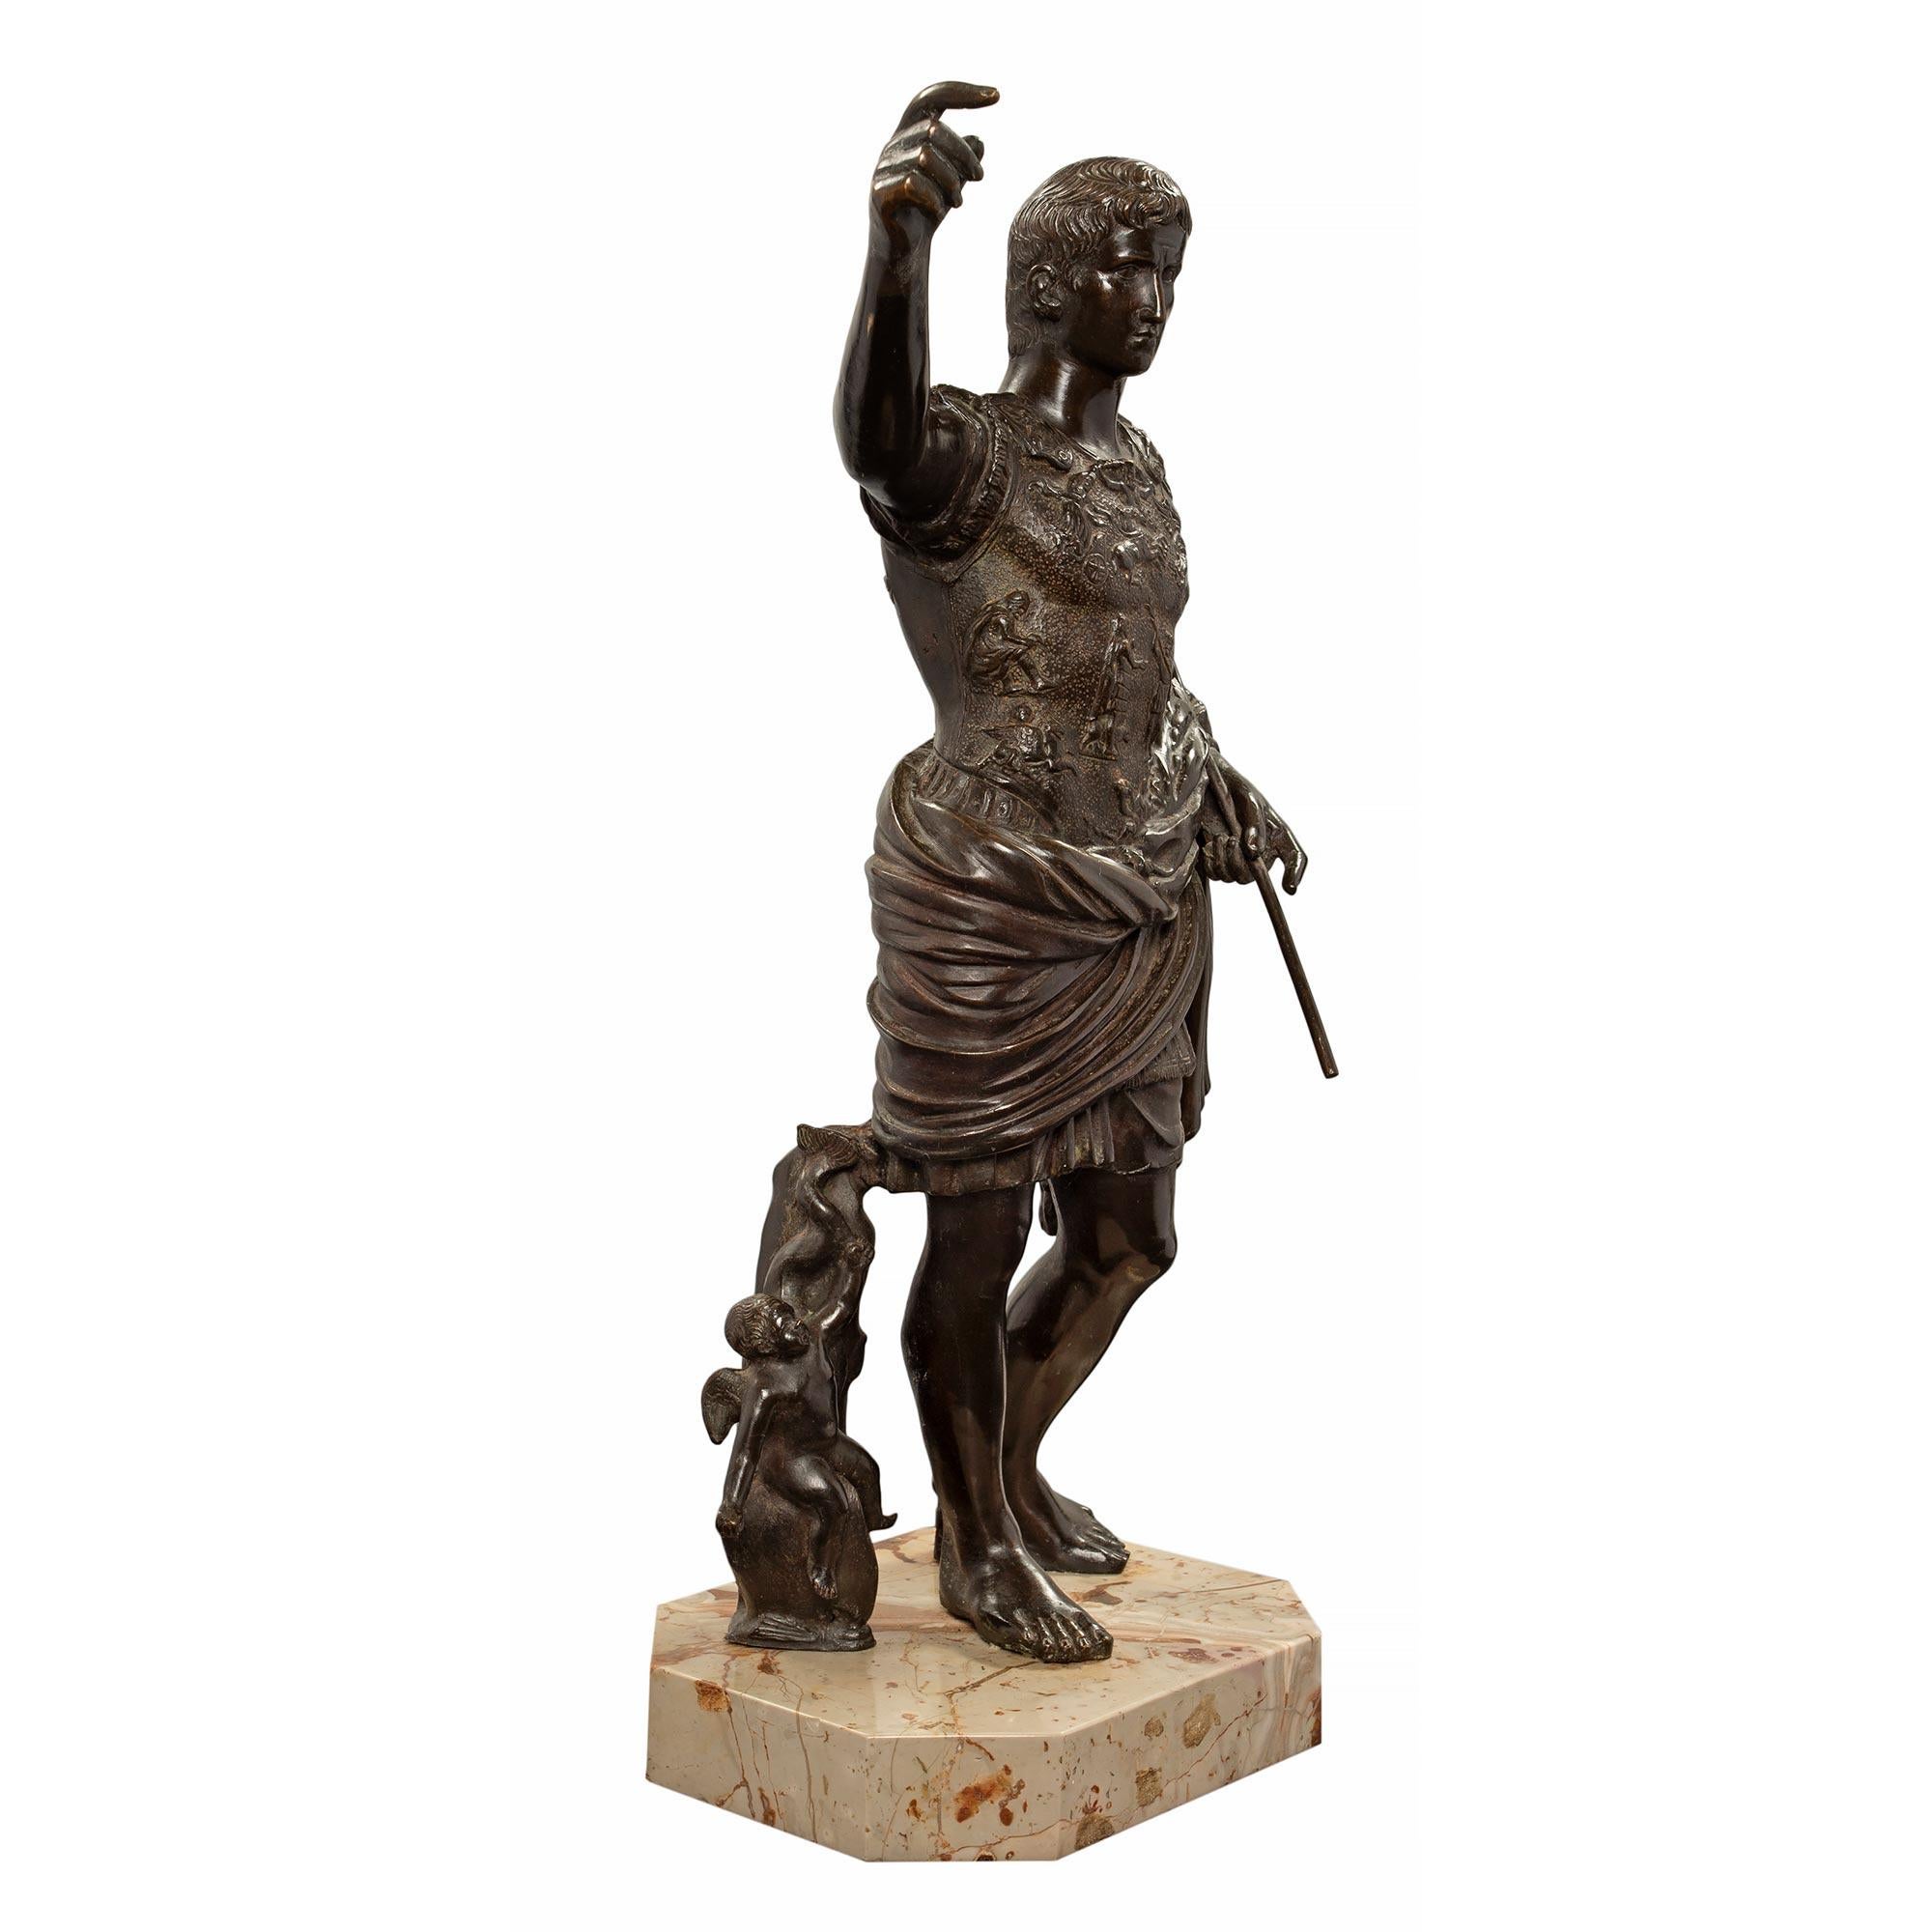 A handsome French 19th century patinated bronze statue of Augustus of Prima Porta. The statue is raised by a square marble base with cut corners. Augustus of Prima Porta was also known as Julius Caesar. A Roman statesman and military leader, he